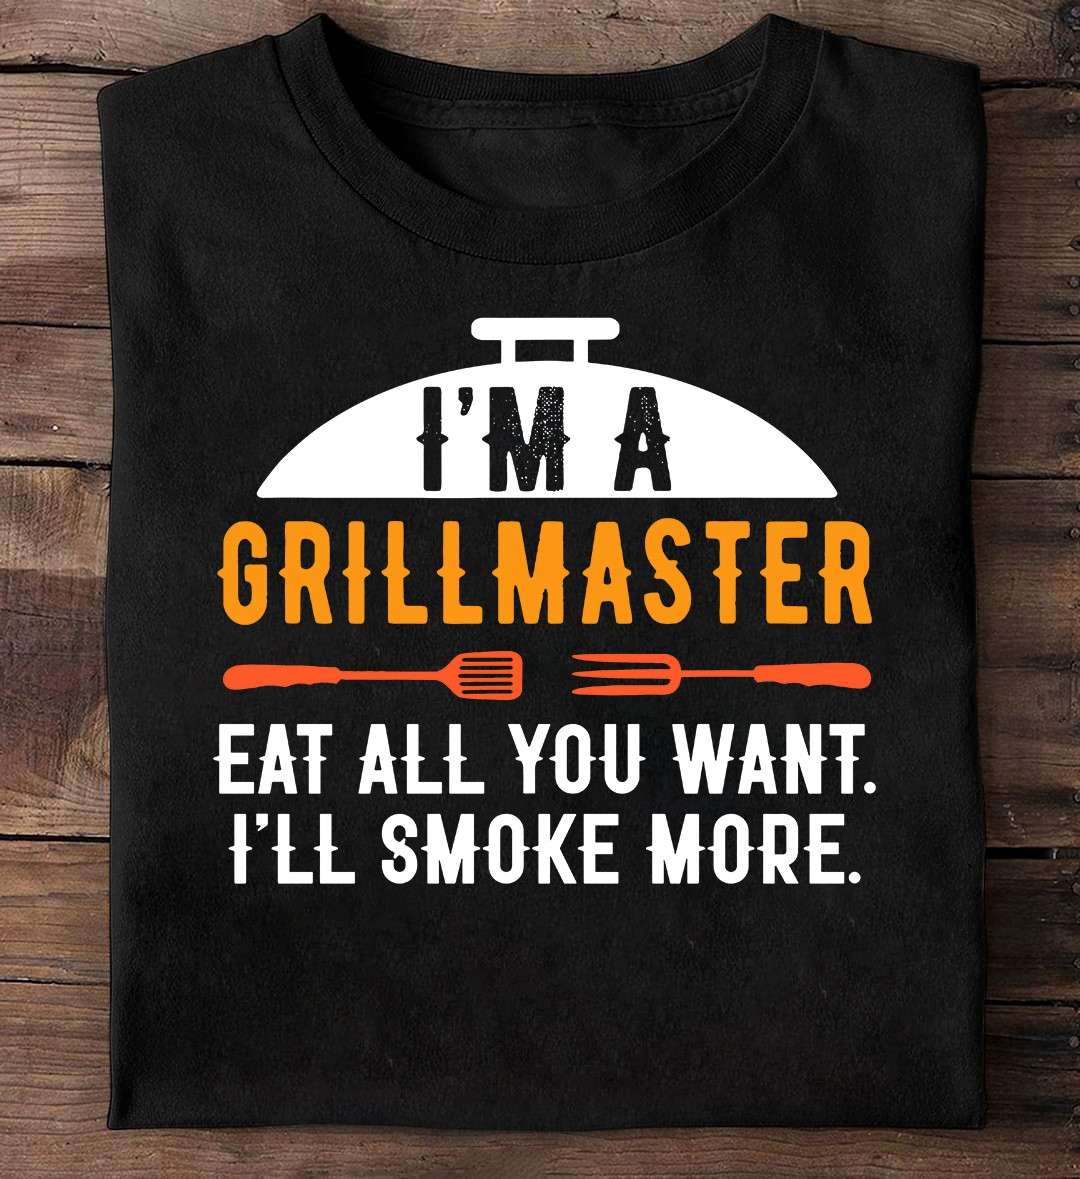 I'm a grillmaster eat all you want, I'll smoke more - Love grilled meat